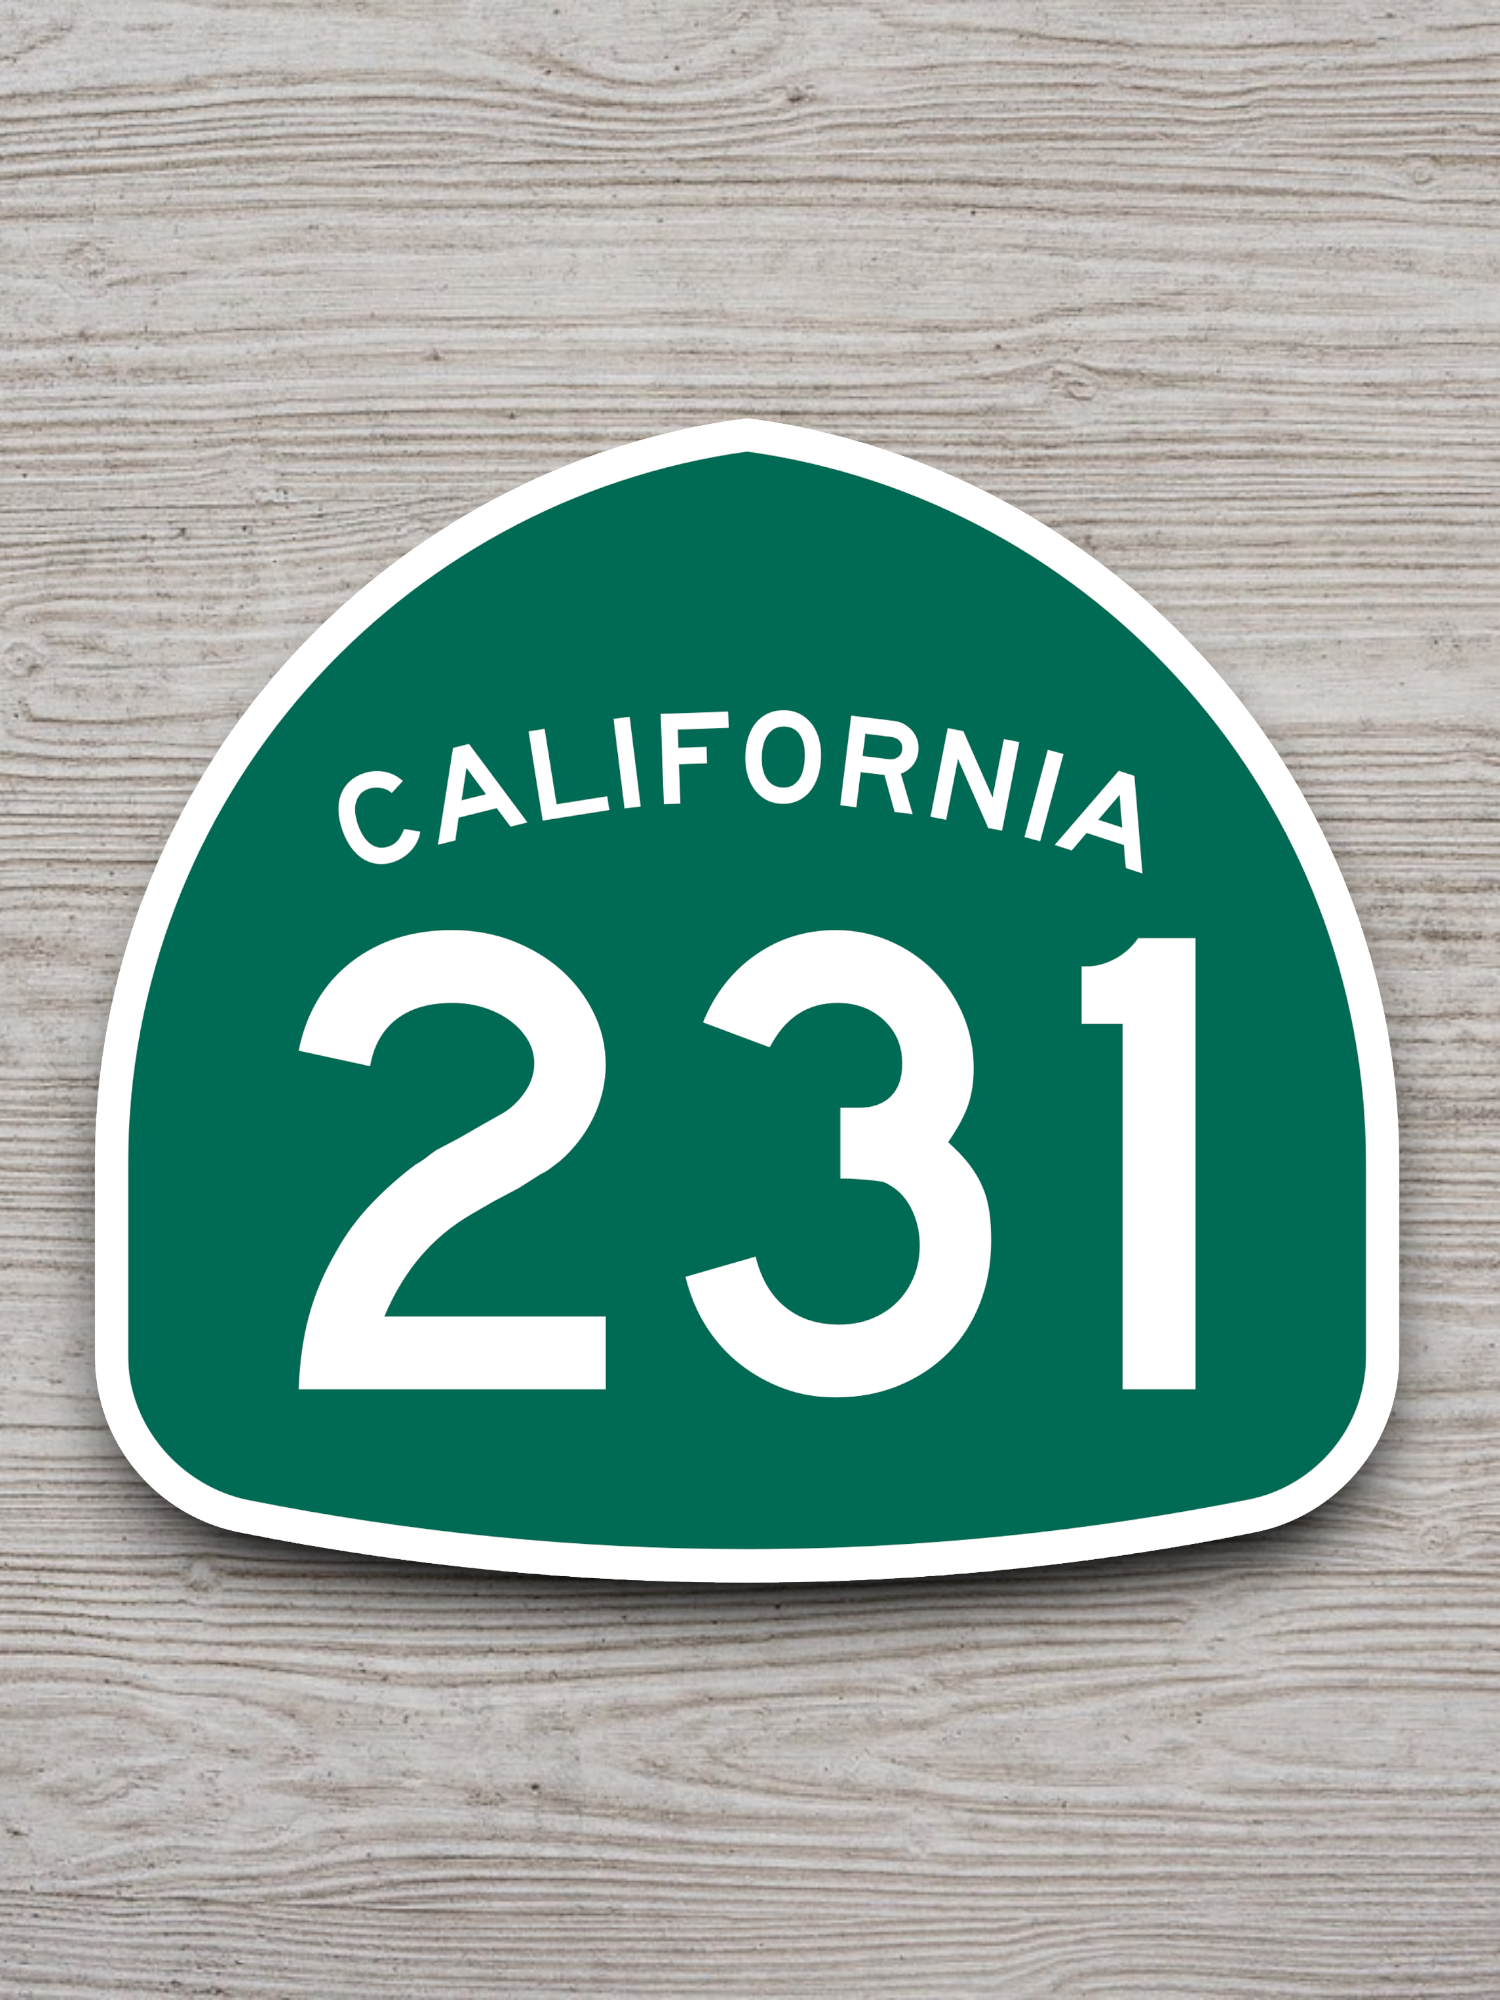 California State Route 231 Road Sign Sticker